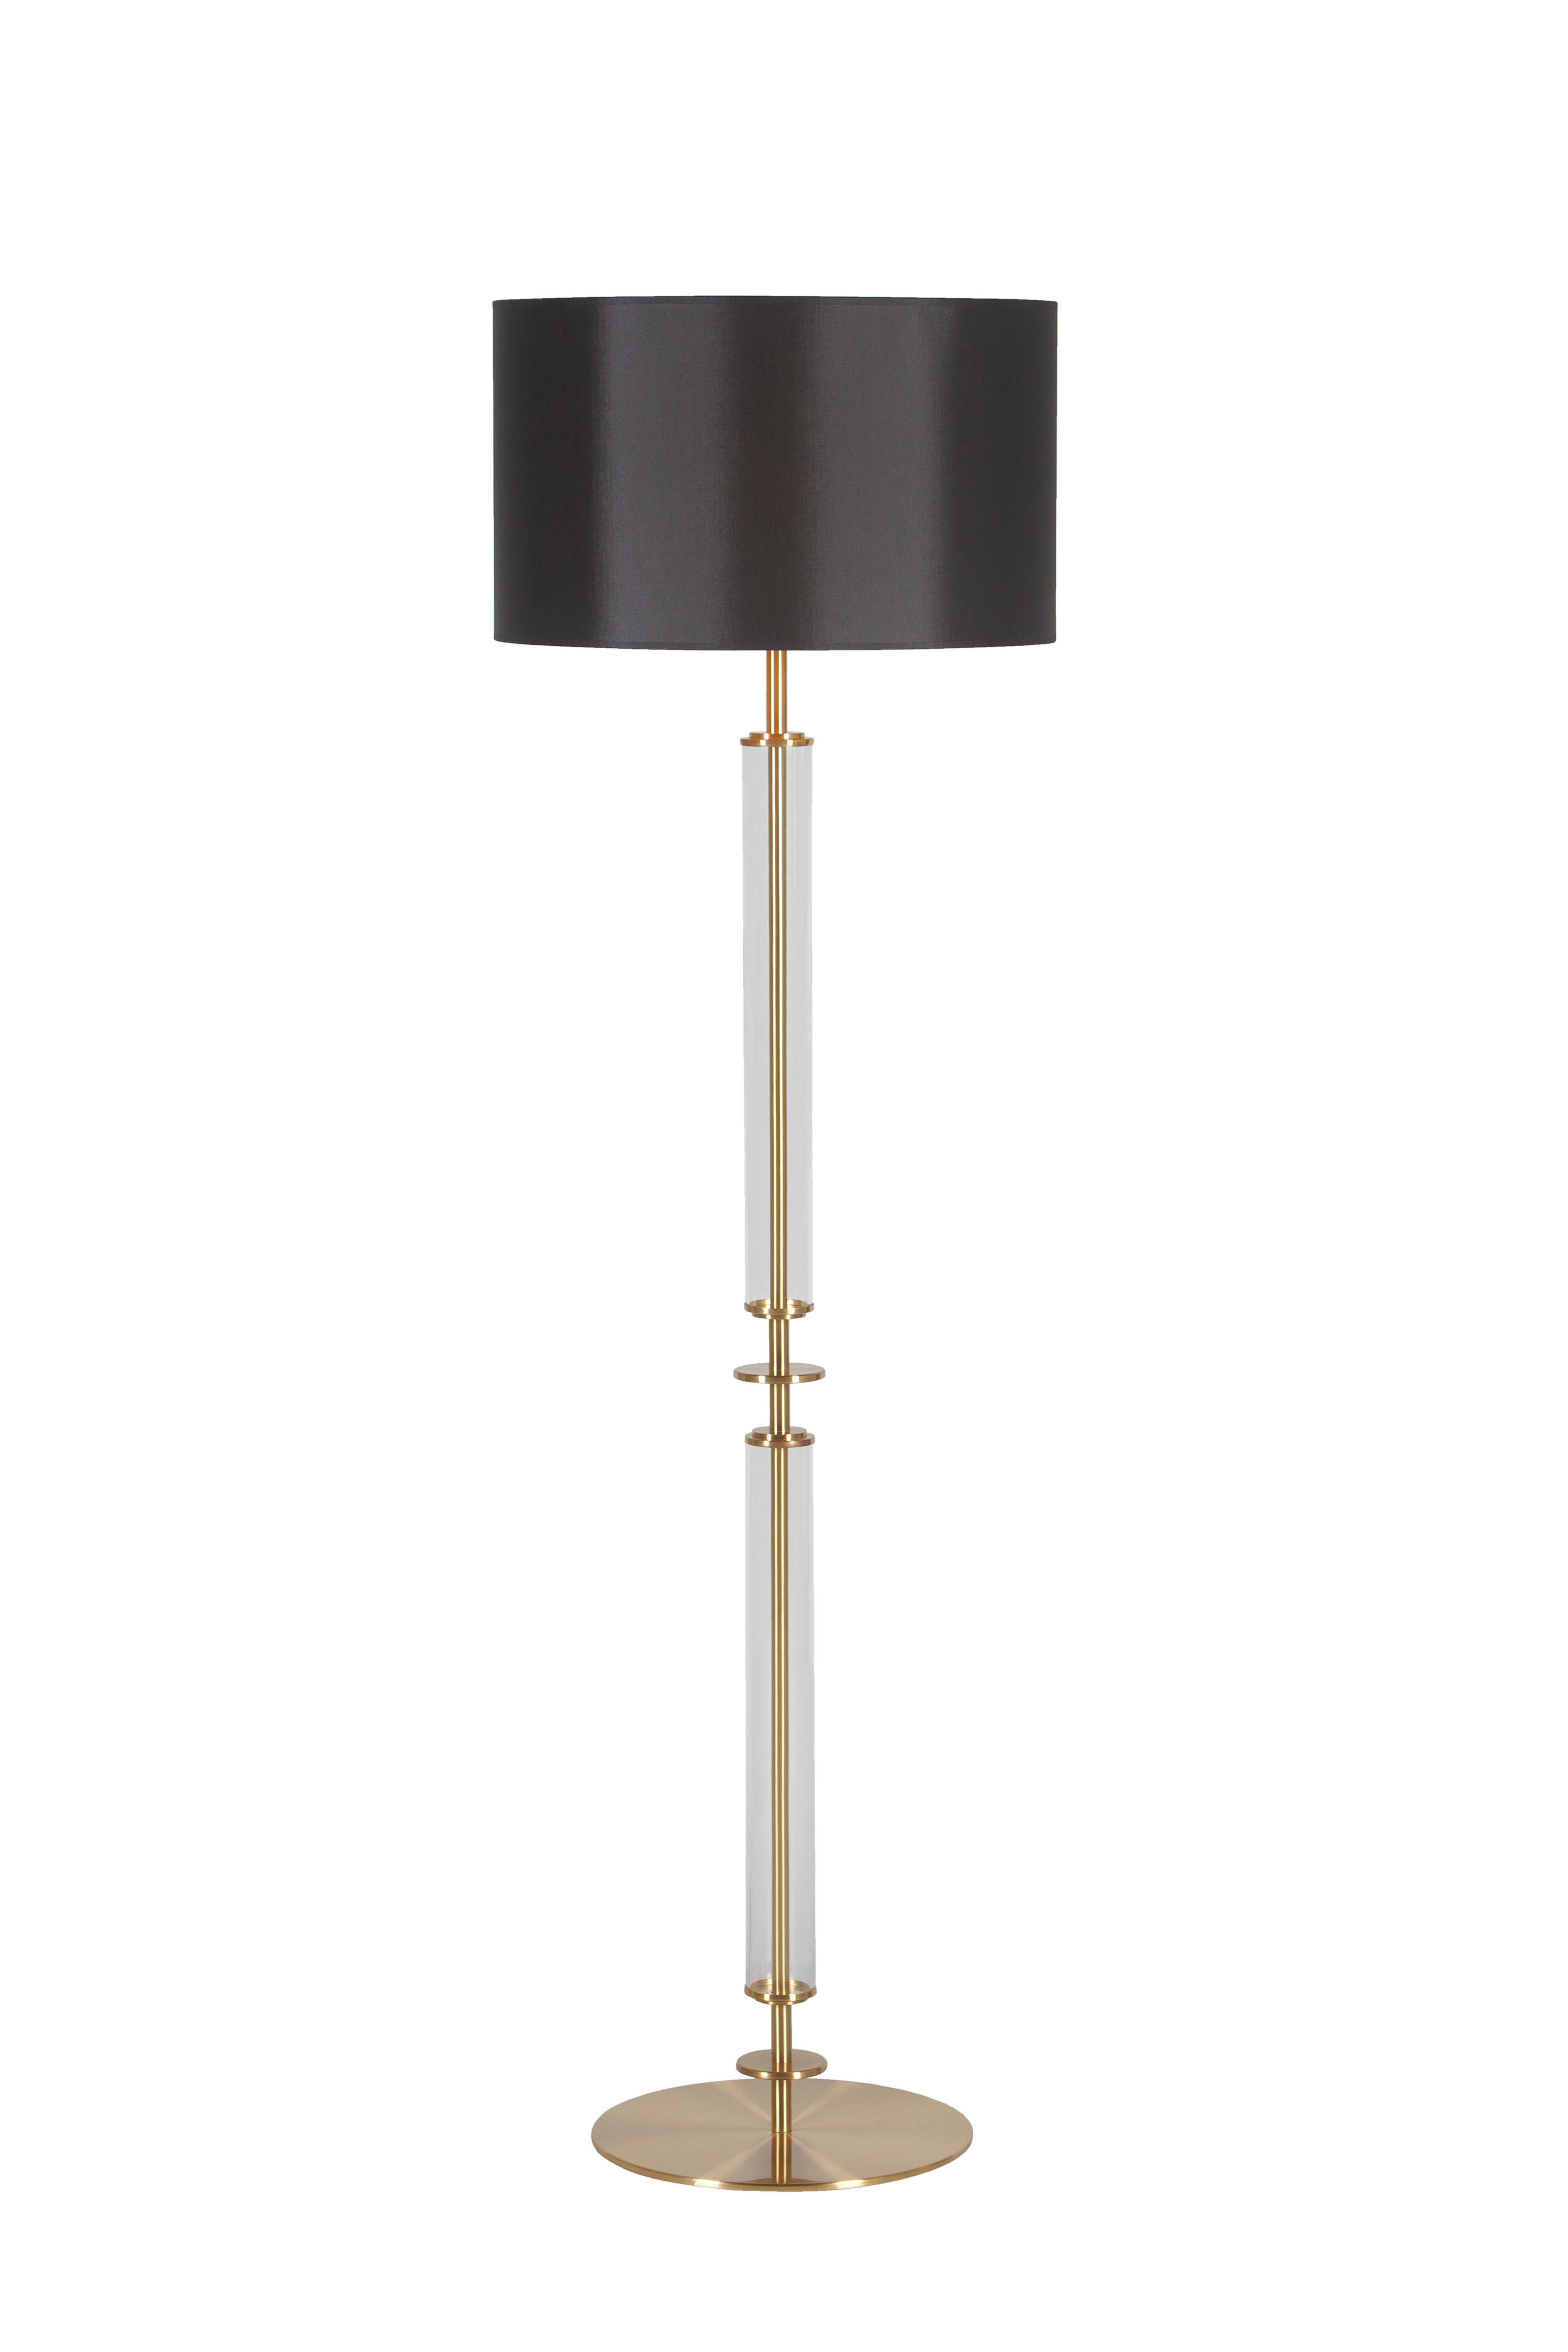 Hand-Crafted Art Deco Valverde Floor Lamp Brushed Brass Black Handmade Portugal by Greenapple For Sale